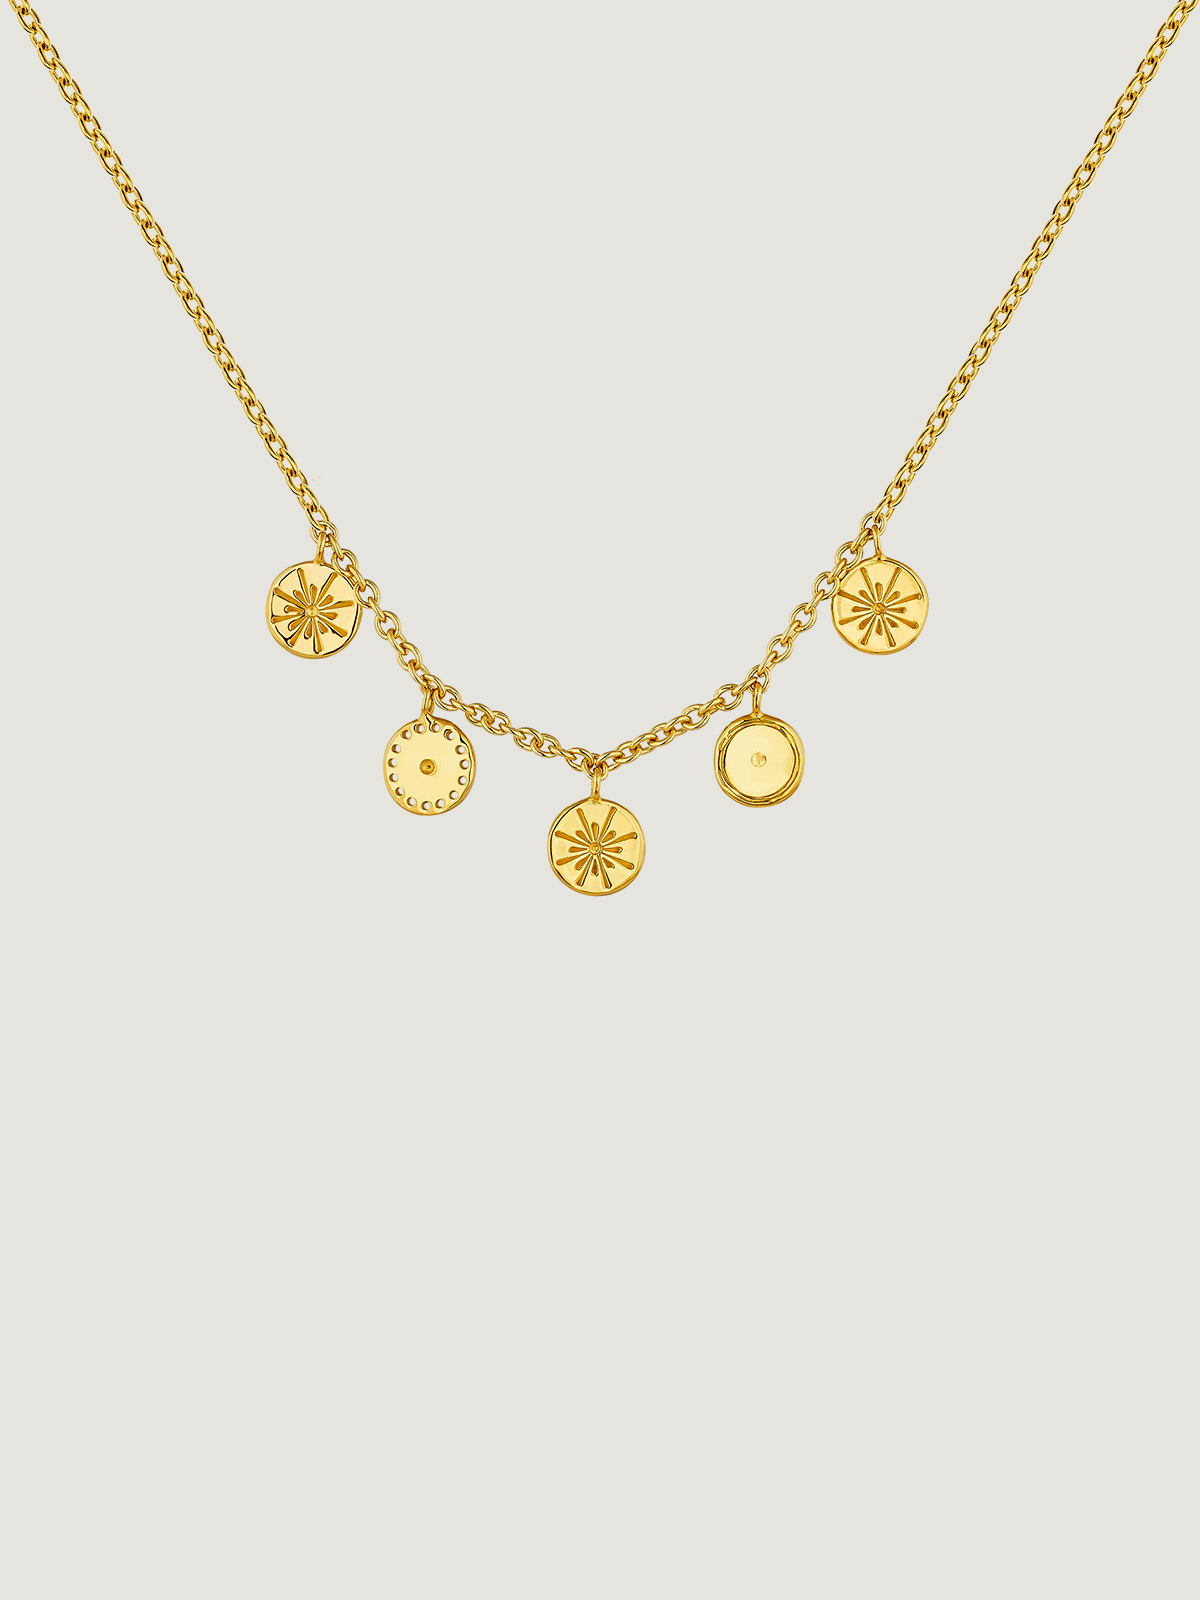 925 Silver necklace bathed in 18K yellow gold with medals